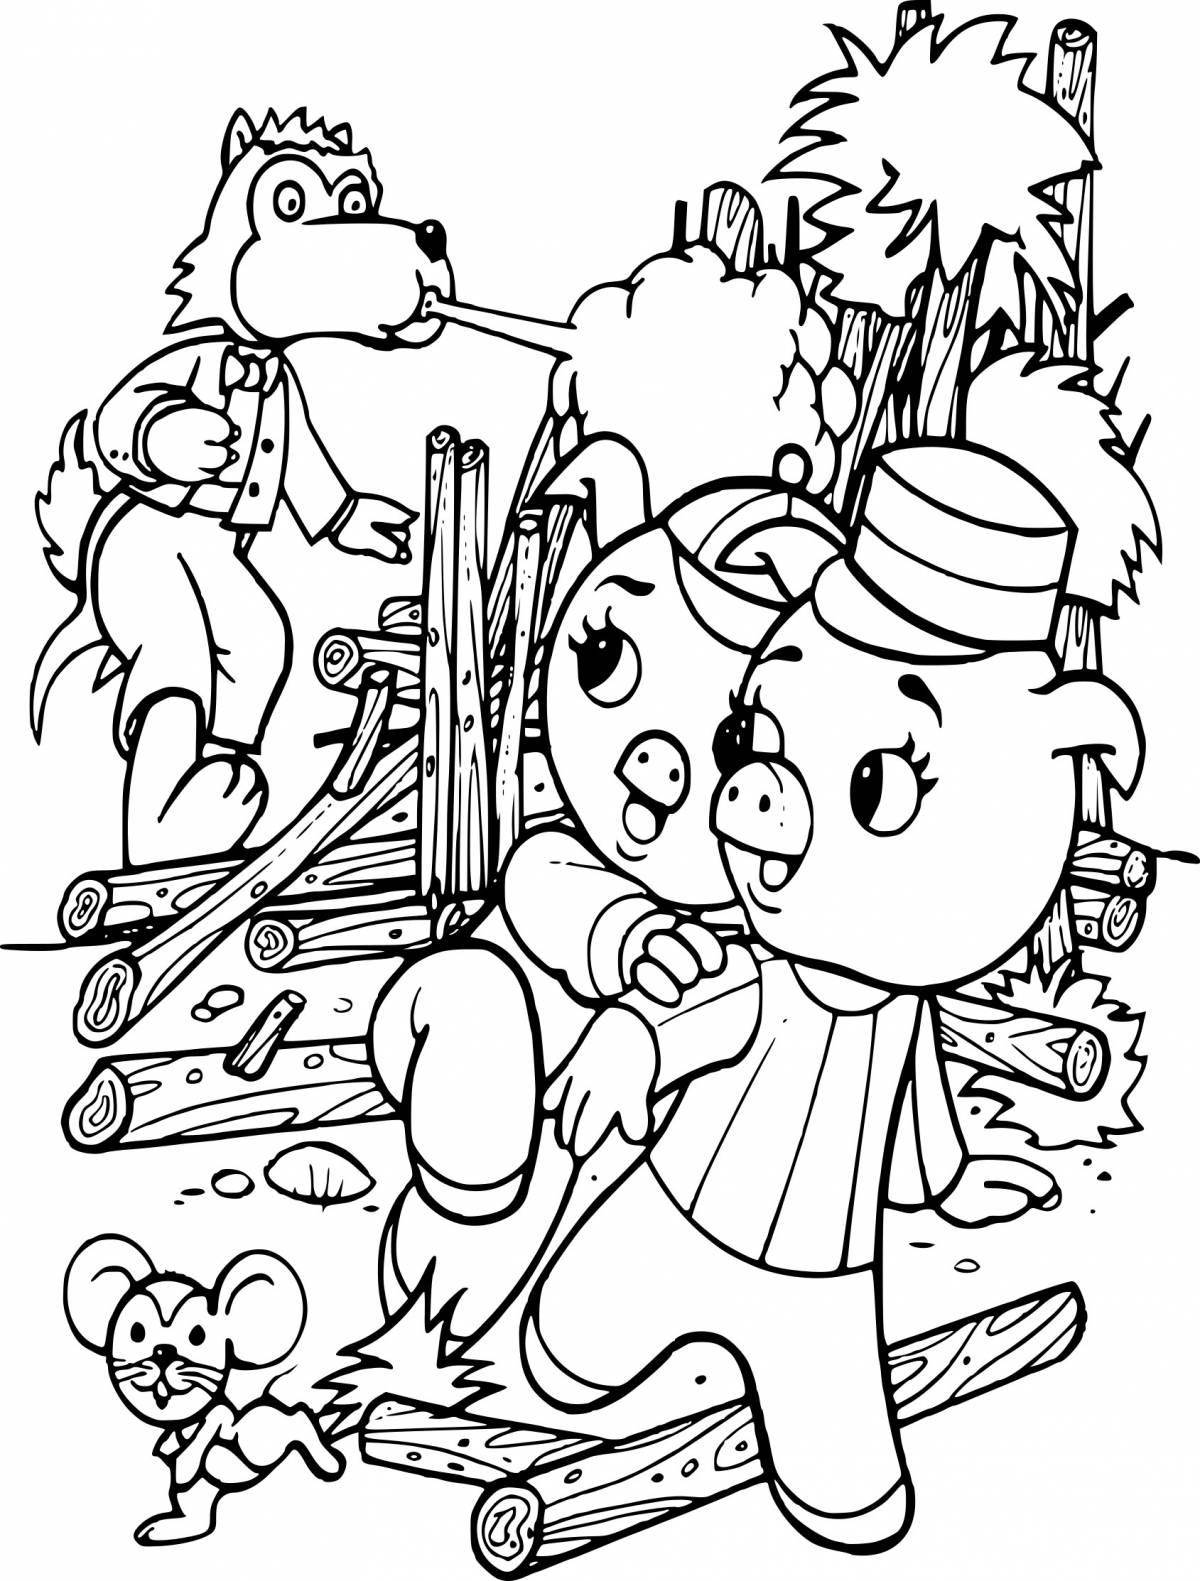 3 little pigs live coloring for kids